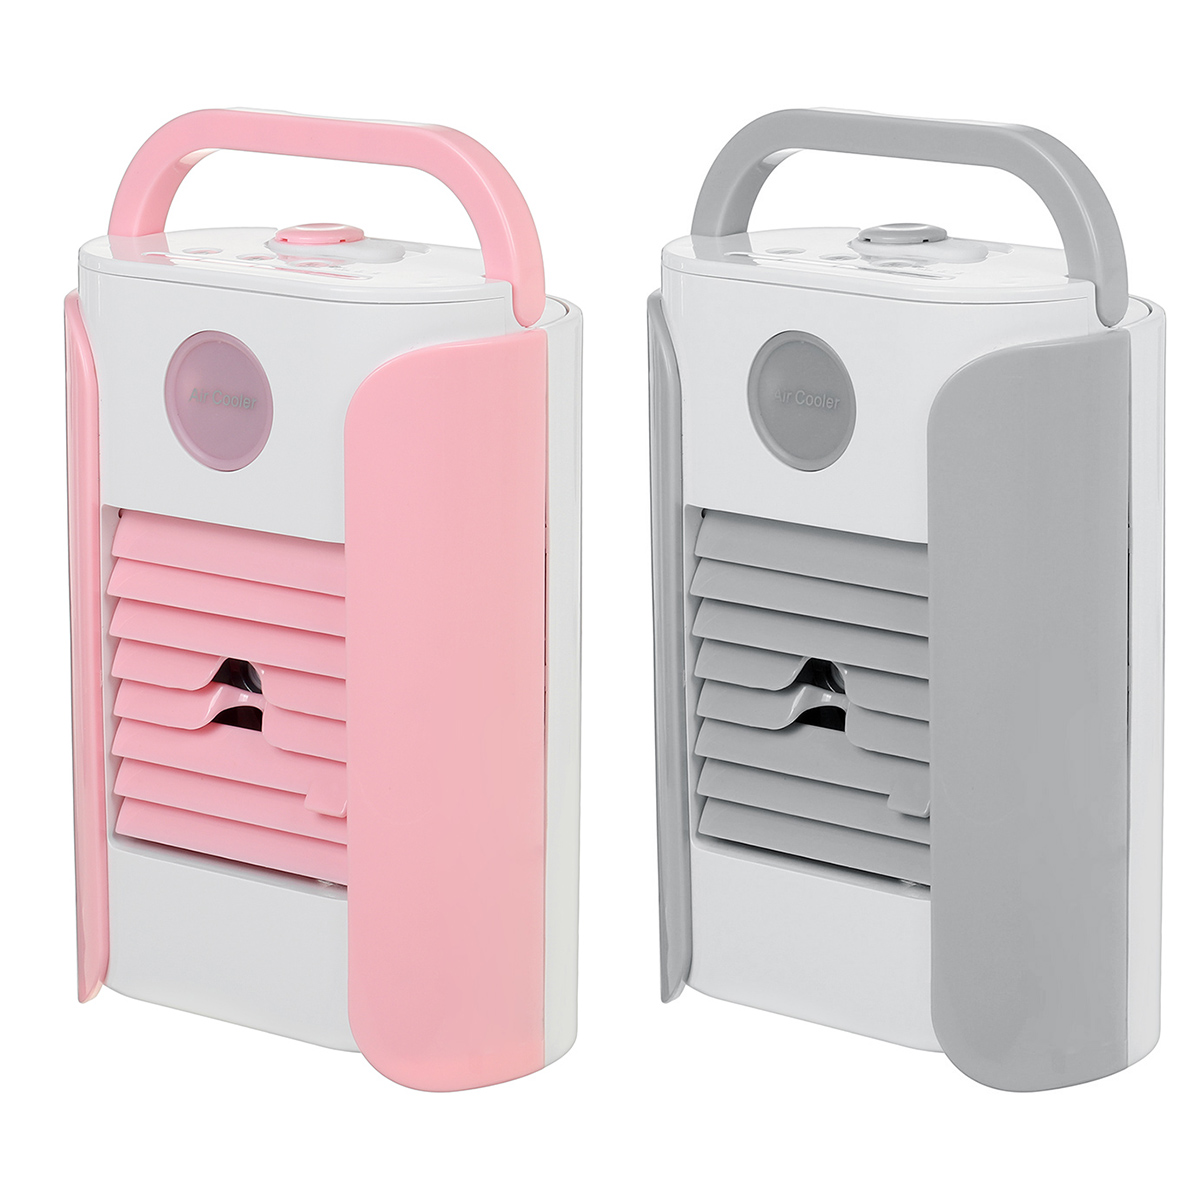 Multifunction-Humidifier-Portable-Air-Cooler-Cool-Conditioner-Conditioning-Fan-1715755-7